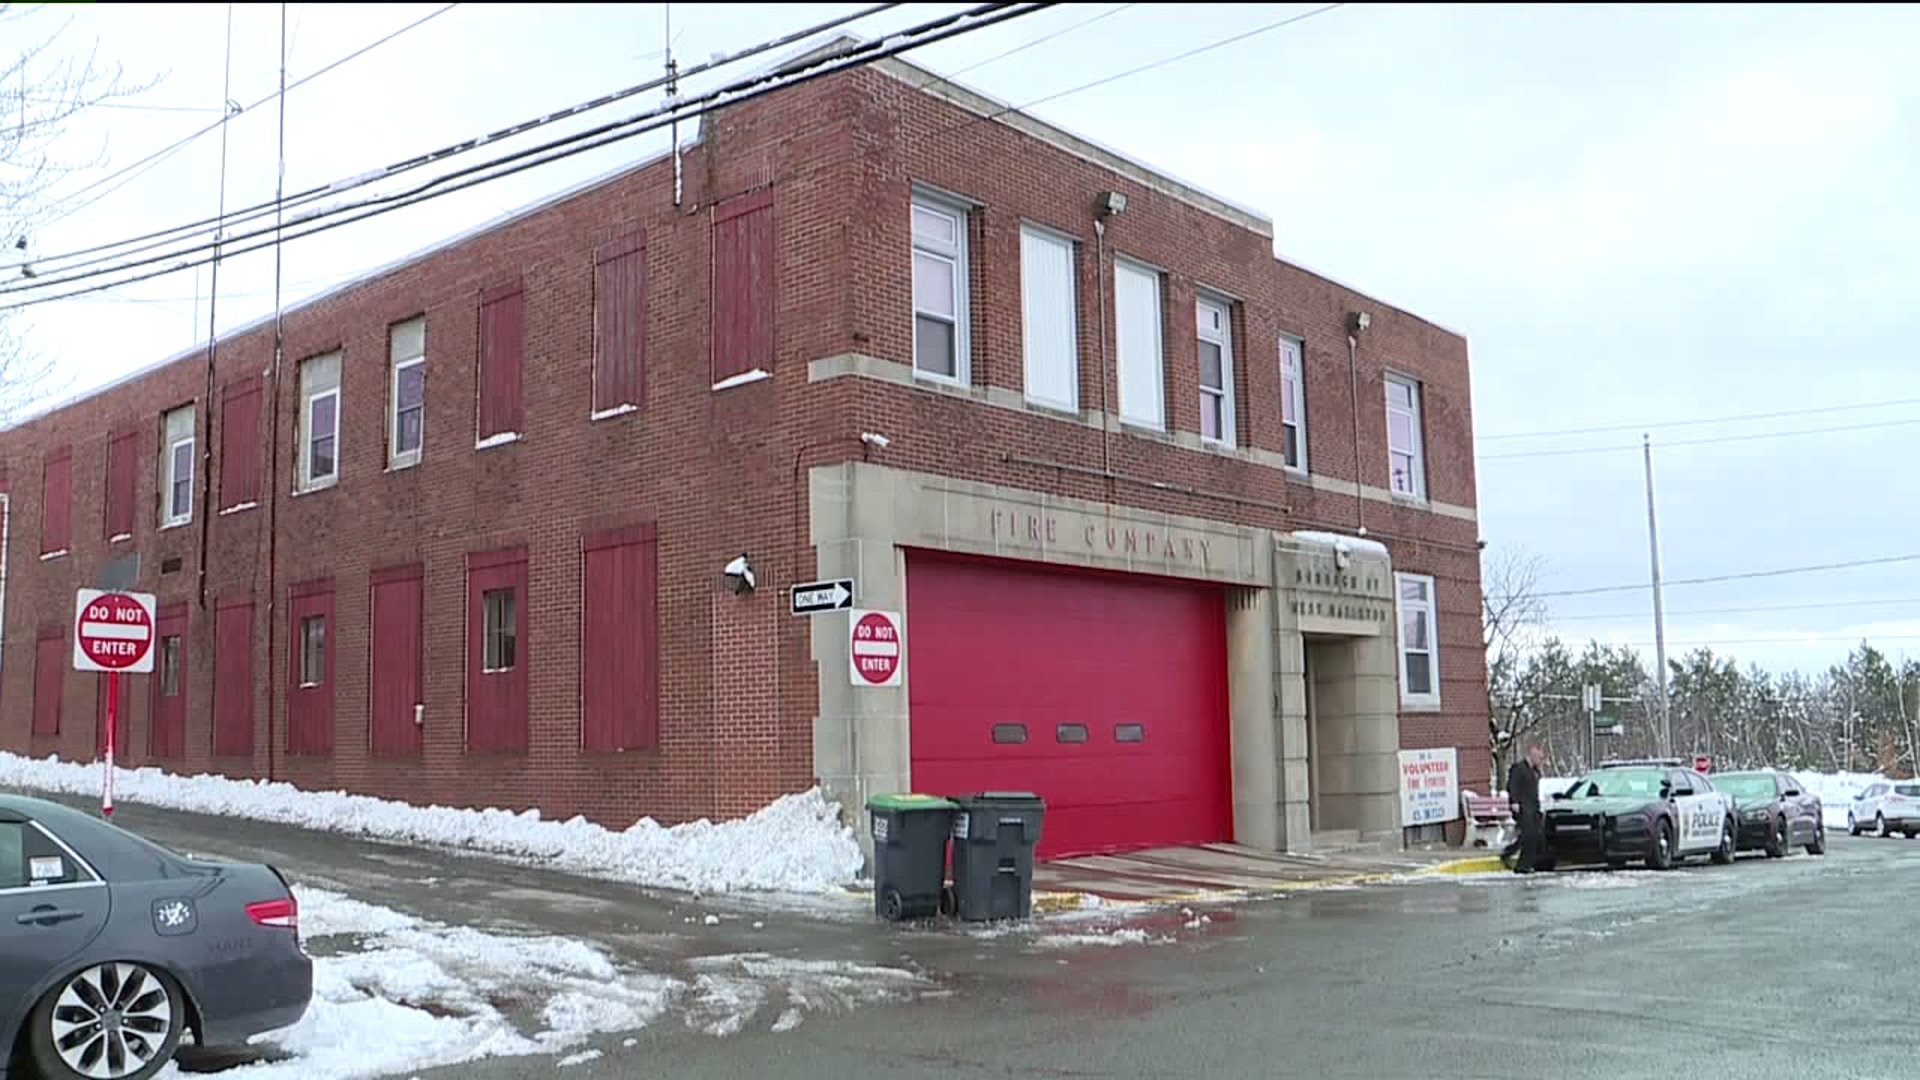 PA Auditor General Finds Misuse of Funds at Volunteer Fire Company